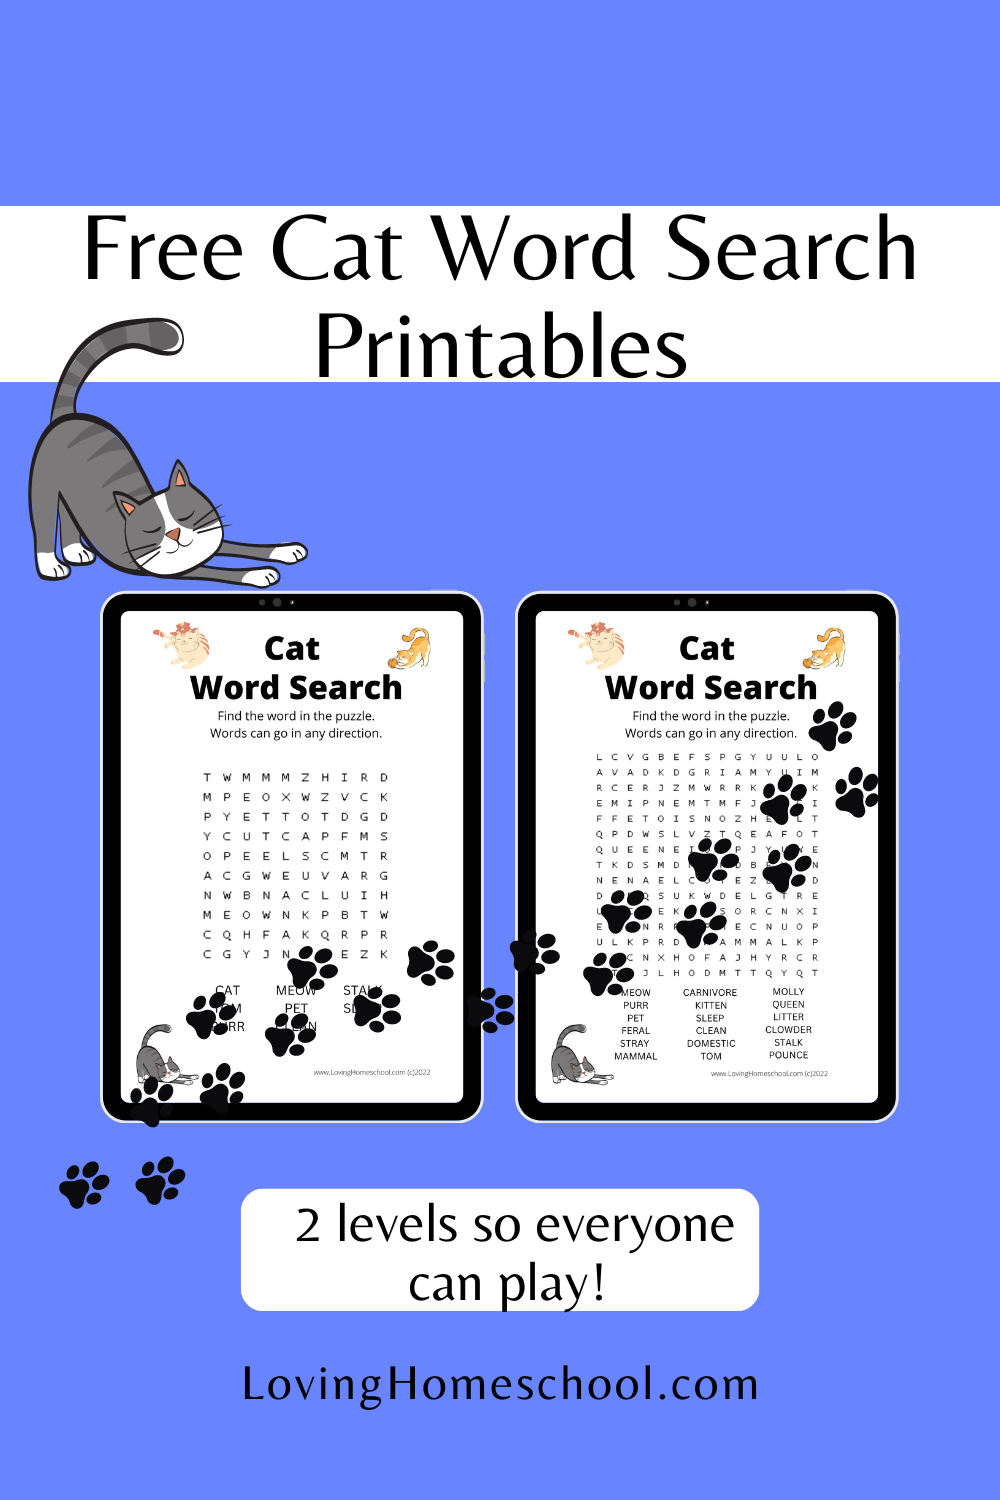 Cat Word Search Printables Pinterest Pin